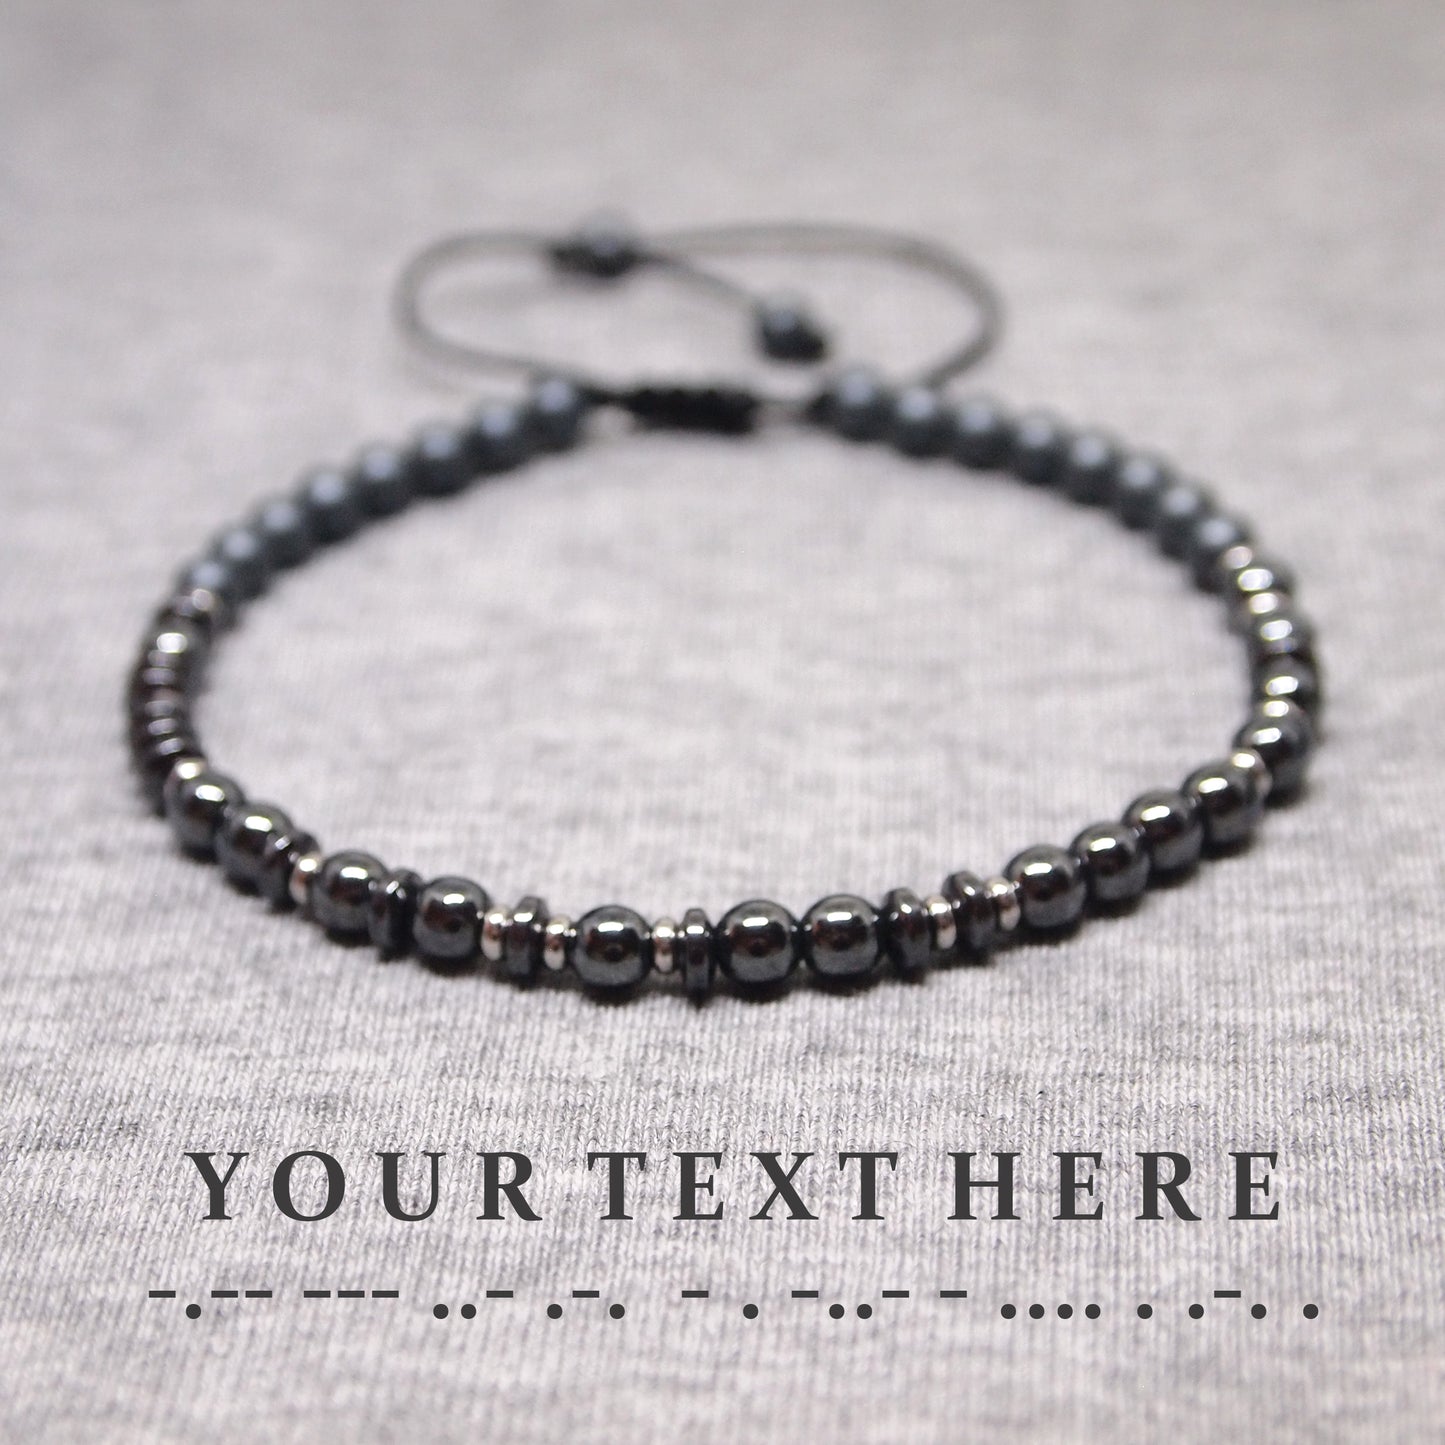 mens morse code bracelet with your message, mens gift idea